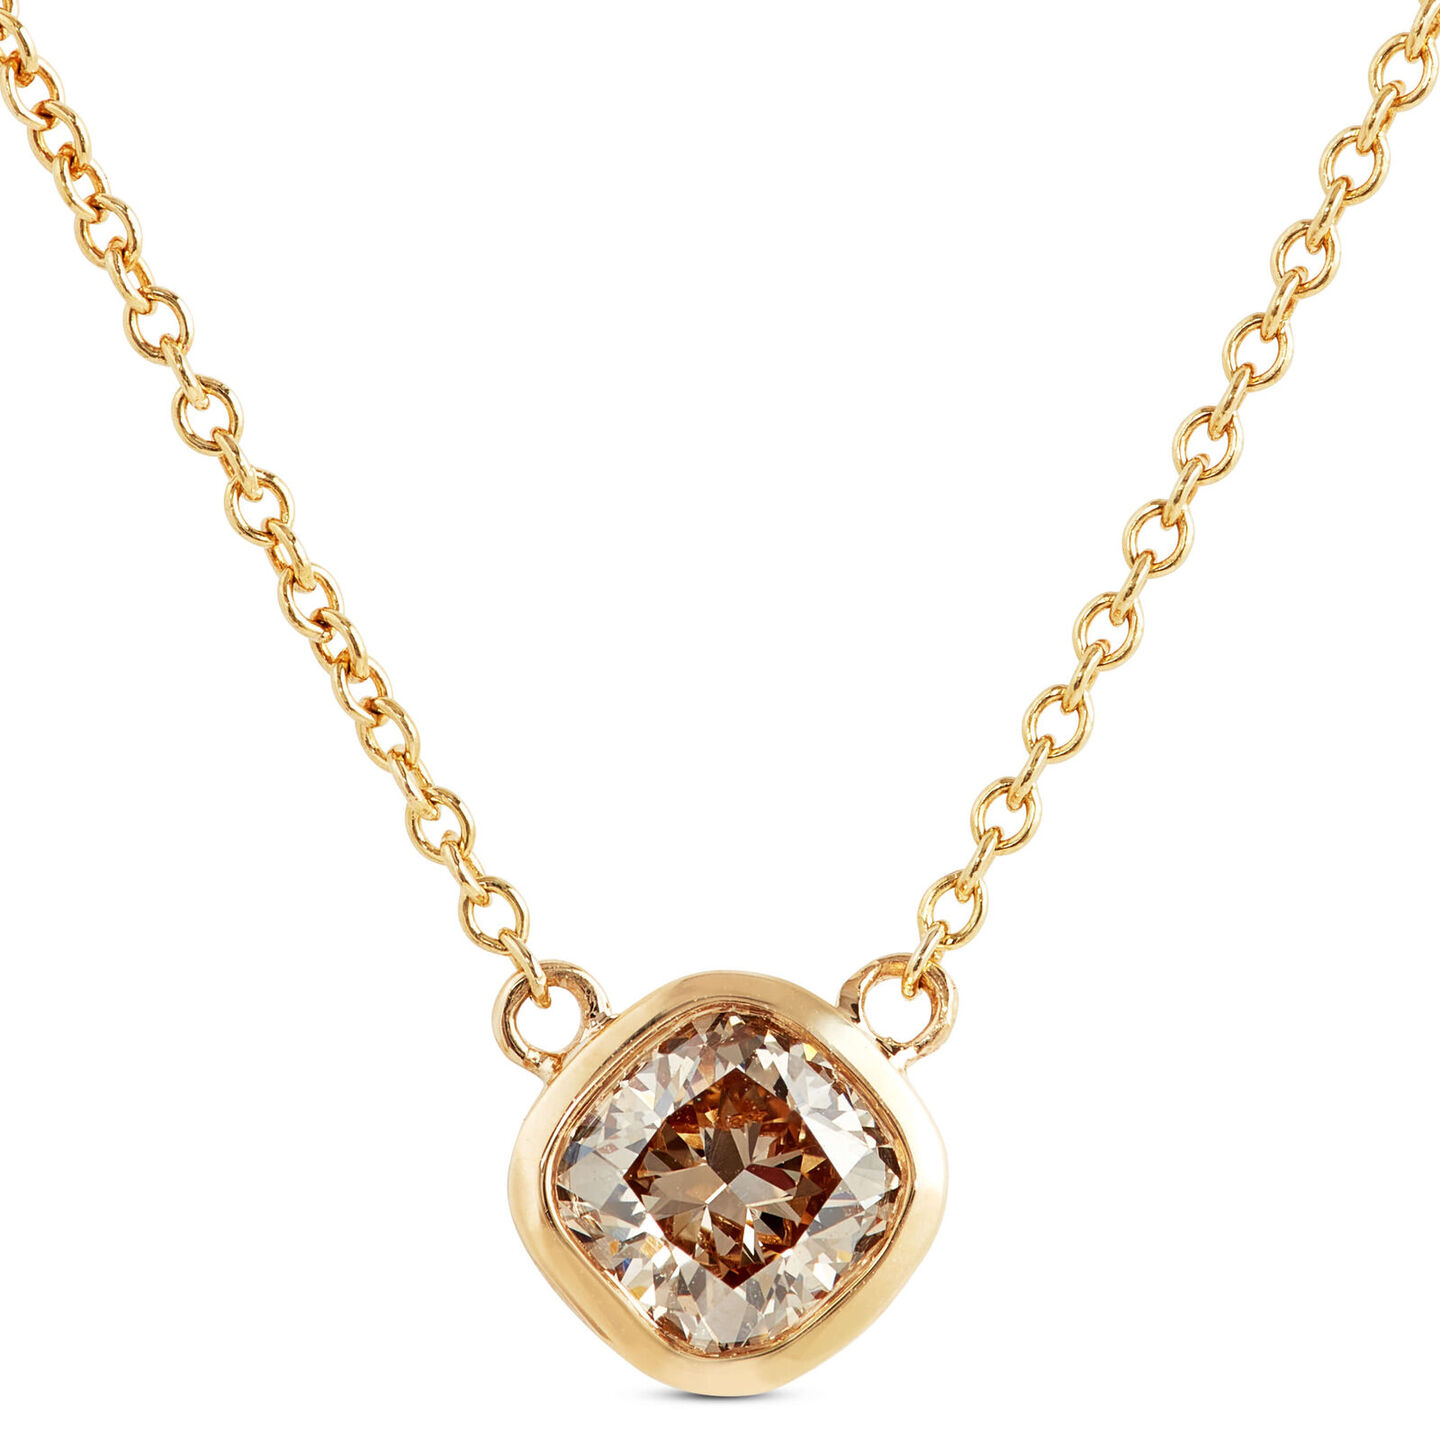 Cushion cut brown diamond necklace in 14K yellow gold against white background